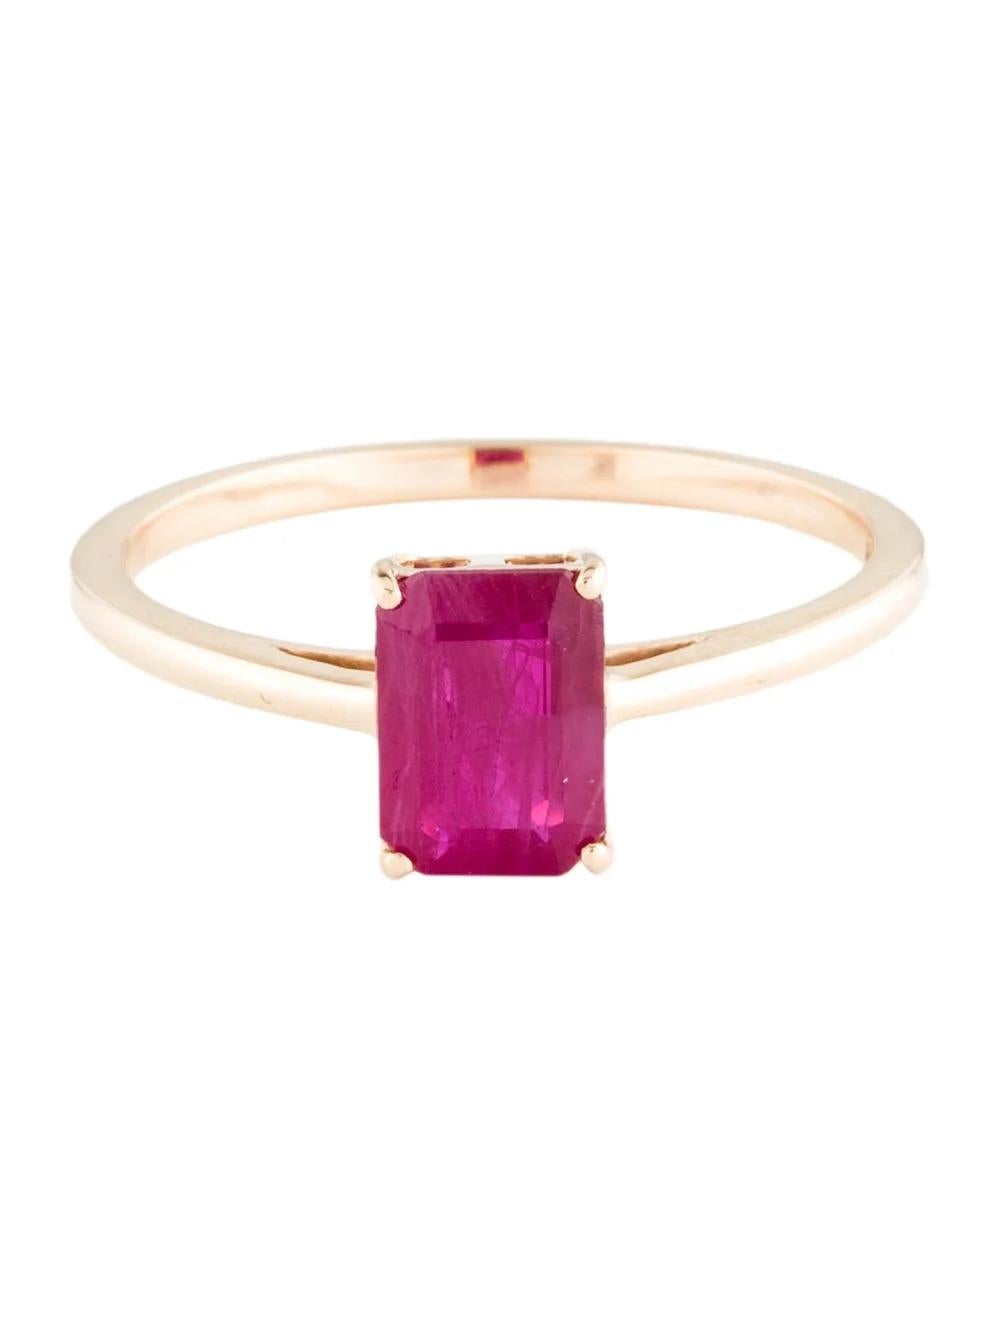 Emerald Cut 14K Ruby Cocktail Ring, Size 6.75: Elegant Red Gemstone in Yellow Gold Setting For Sale